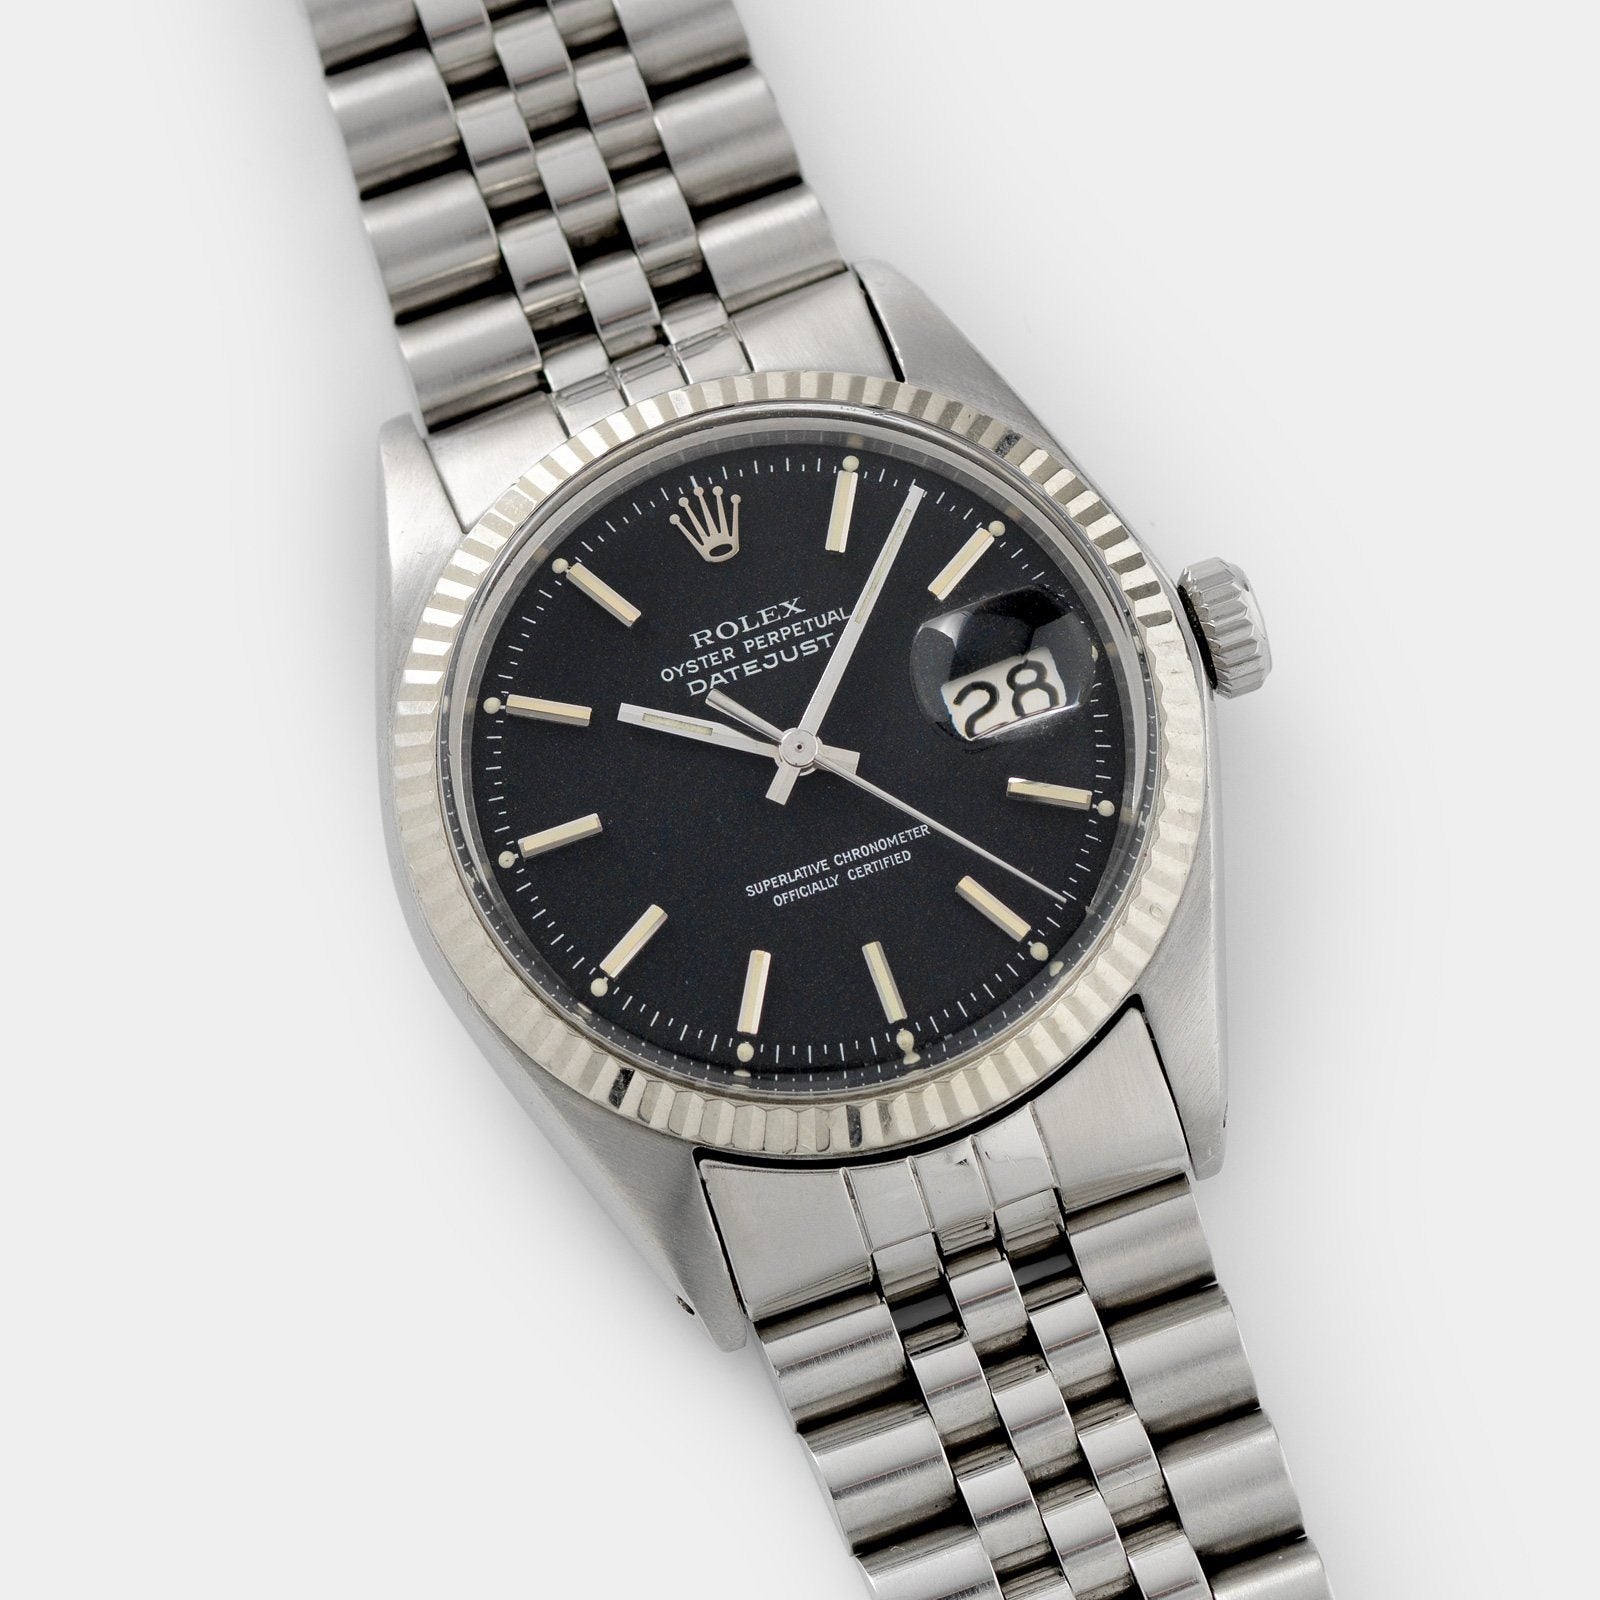 Rolex Datejust Reference Black Marble Dial 1601 with White gold fluted bezel